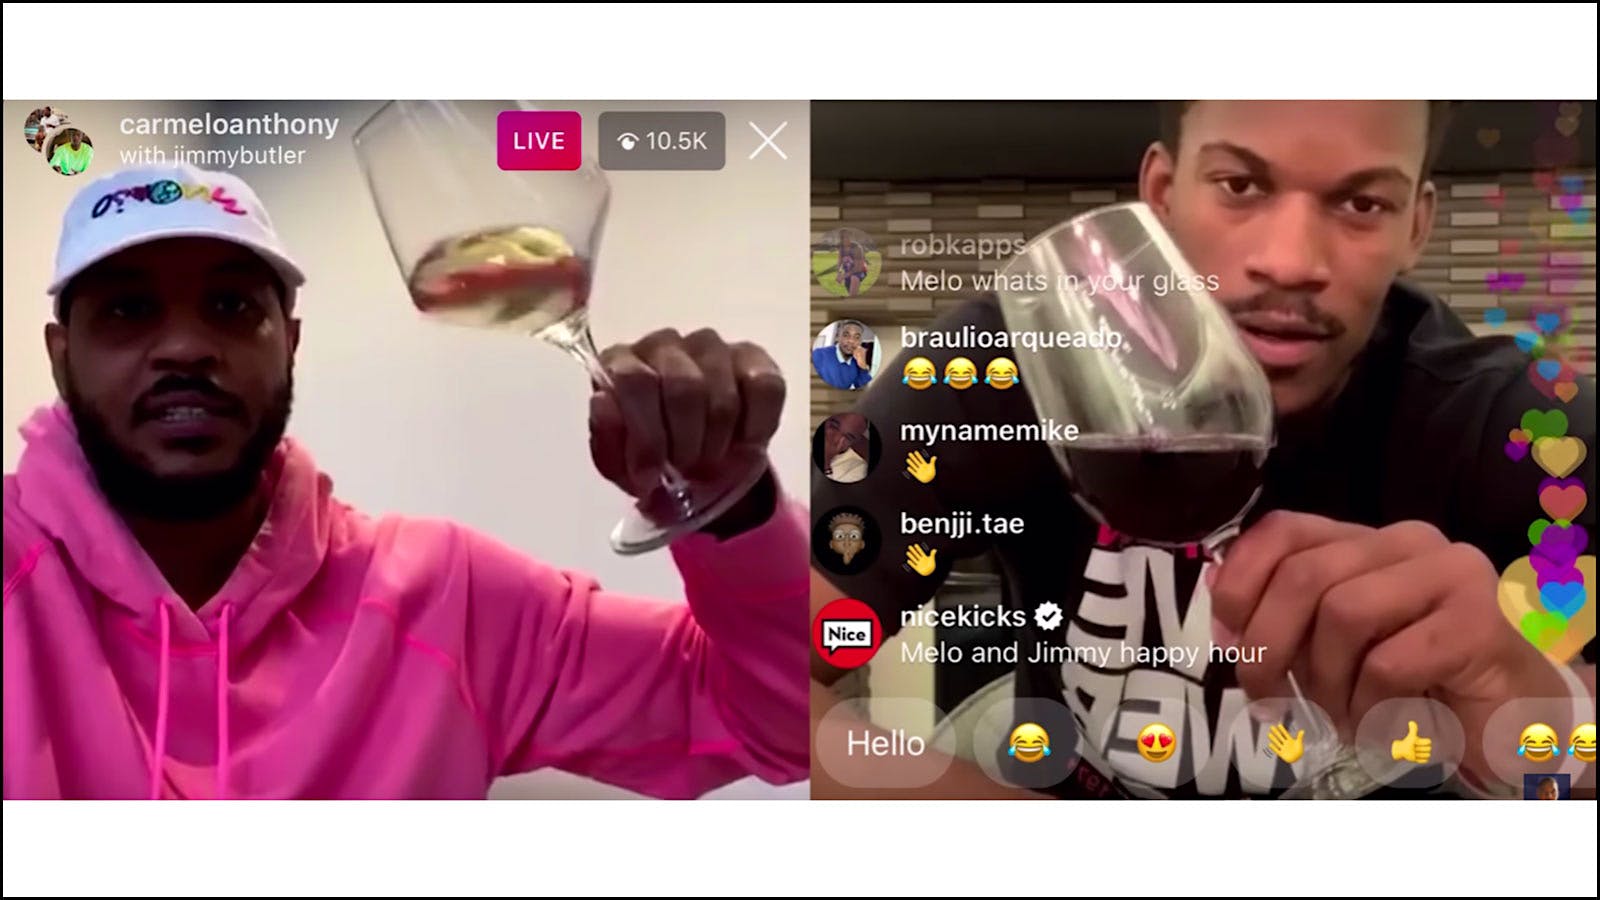 NBA Stars Carmelo Anthony and Jimmy Butler Reveal Favorite Wines on Instagram Live